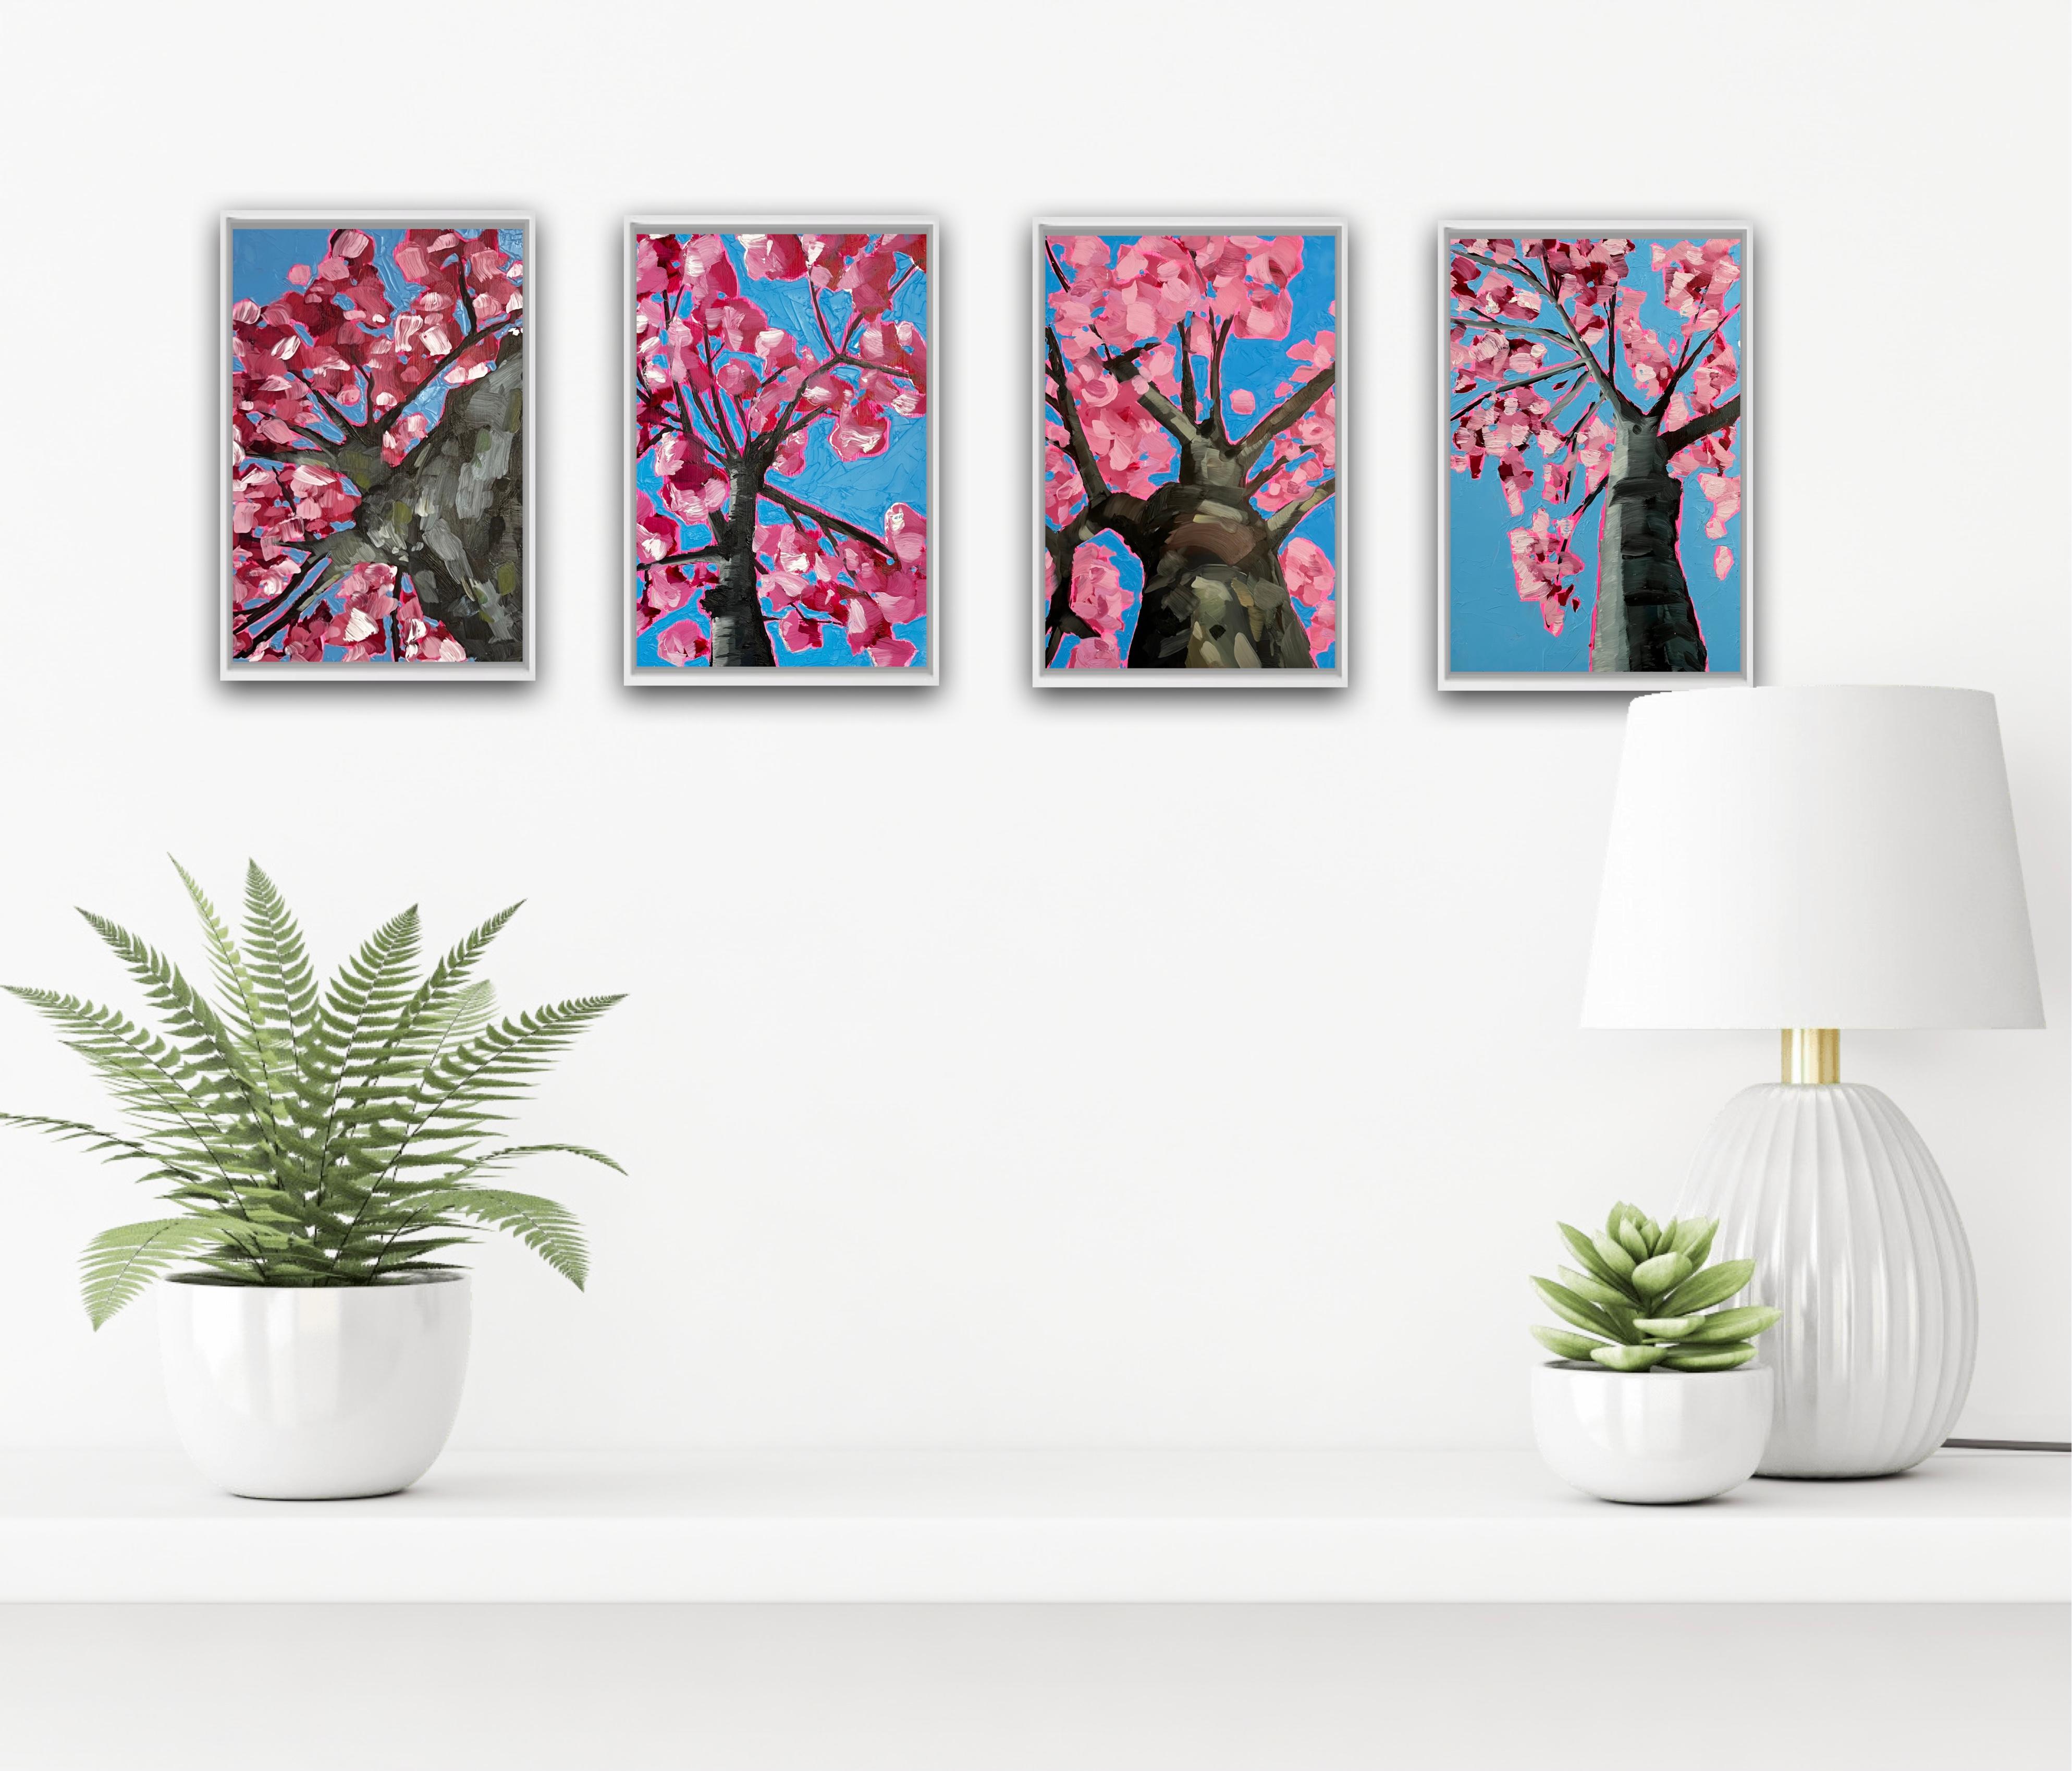 Looking Up Through Pink Blossoms Quadtych 
Overall Size : H120 x W80

Looking Up Through Pink Blossom to a Positive Future 

Looking Up Through Cherry Blossom When I’m at my Lowest 

Looking Up Pink Blossom to Find Mindfulness 

Looking Up Through